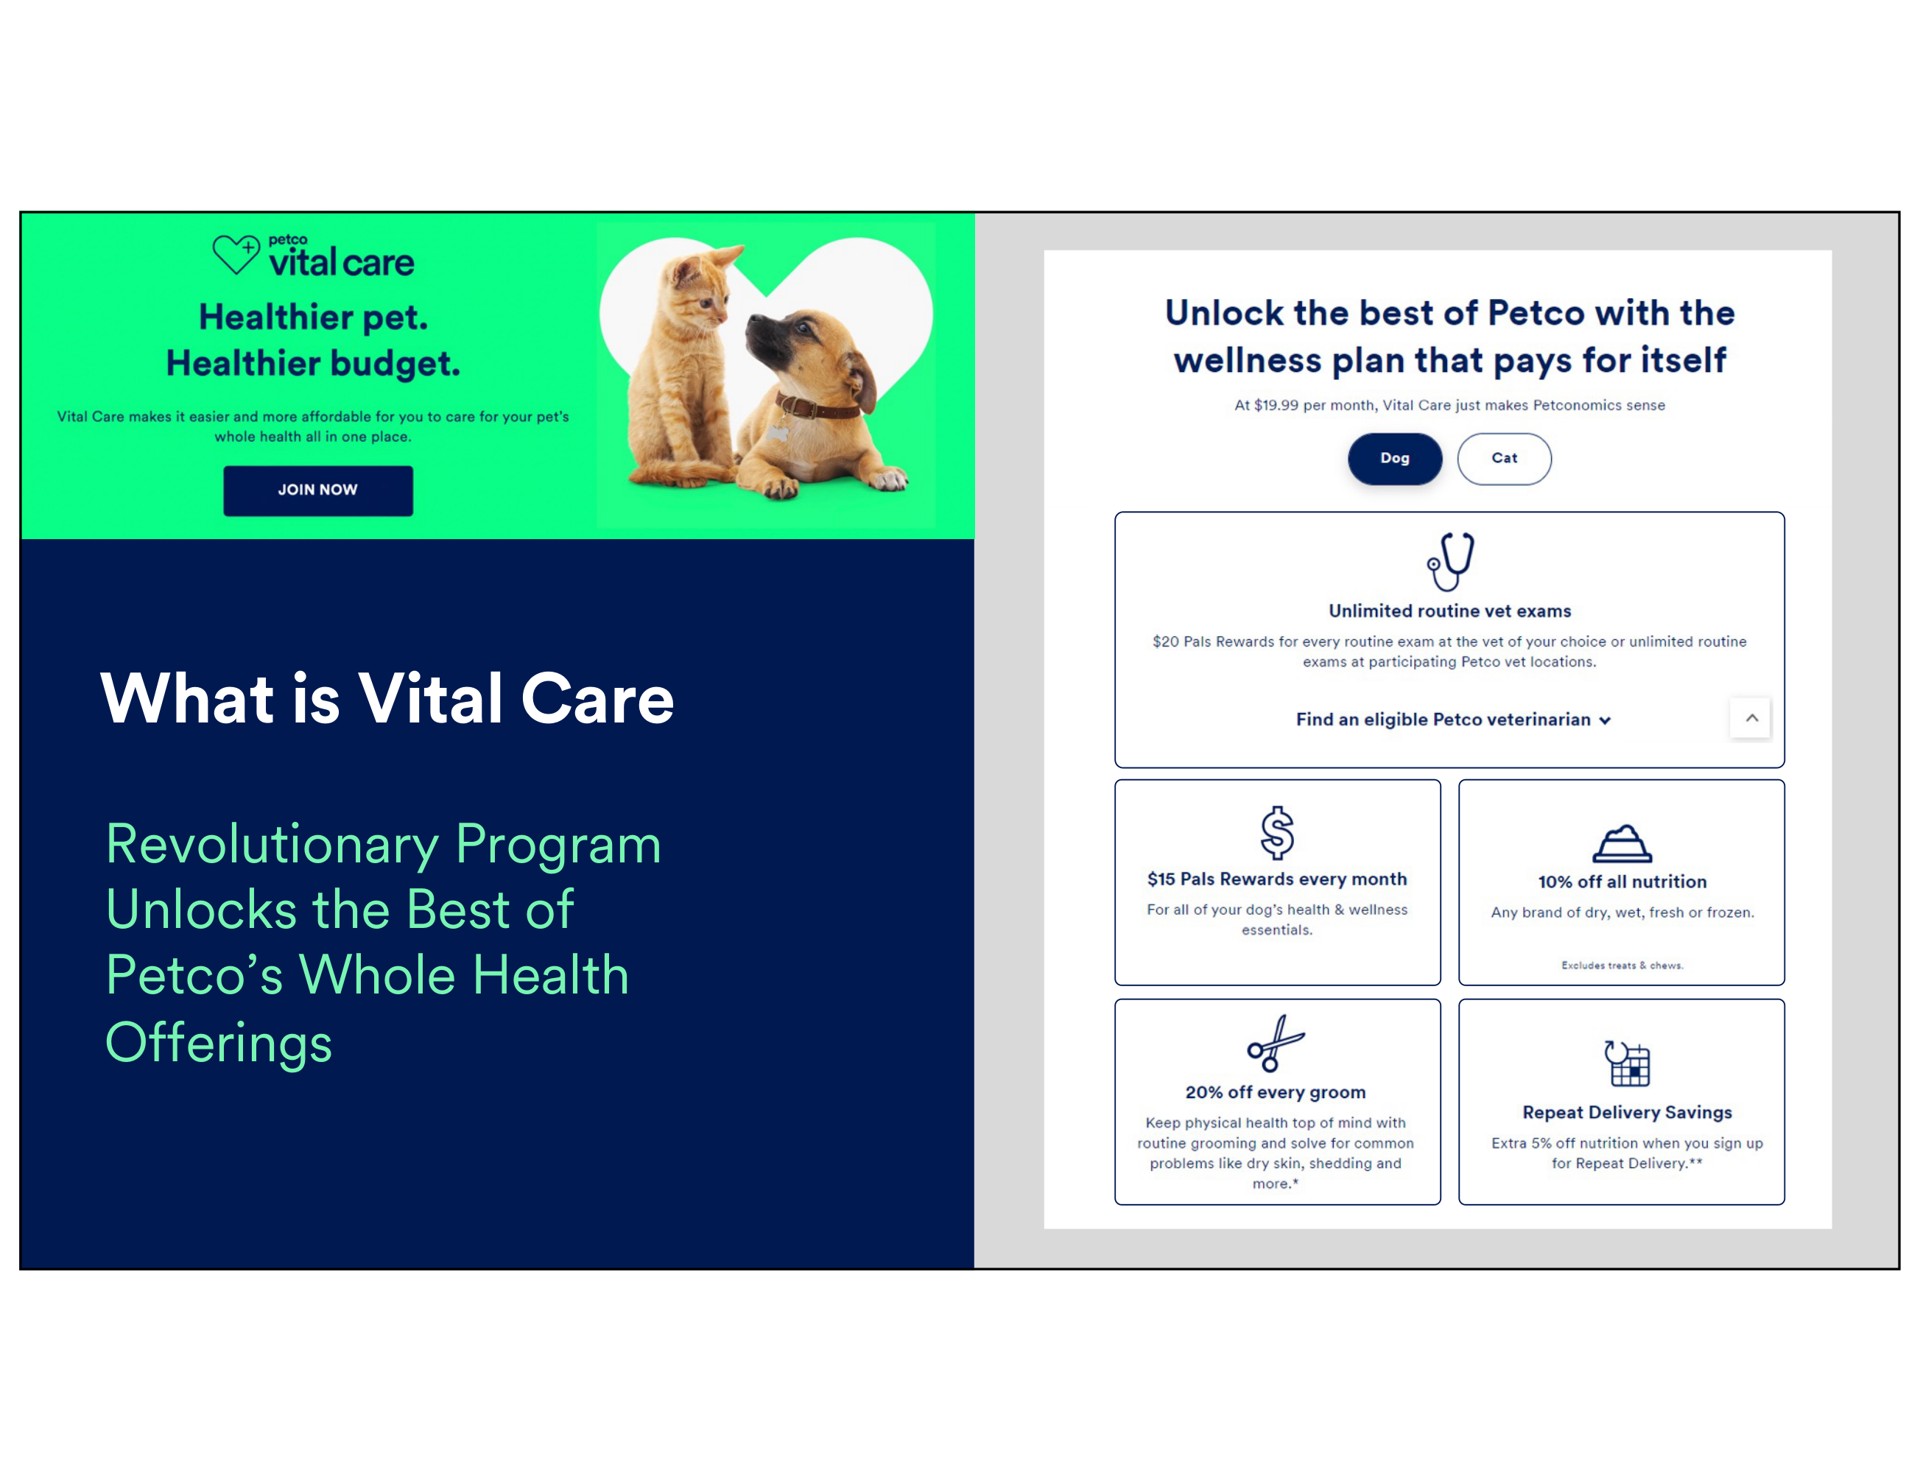 what is vital care revolutionary program unlocks the best of whole health offerings pet budget makes it easier and more affordable for you to for your pet all in one place unlock with wellness plan that pays for itself at per month just makes sense unlimited routine vet exams pals rewards for every routine exam at vet your choice or unlimited routine exams at participating vet locations find an eligible veterinarian a pals rewards every month off all nutrition wellness any brand dry wet fresh or frozen off every groom repeat delivery savings extra off nutrition when you sign up for repeat delivery | Petco